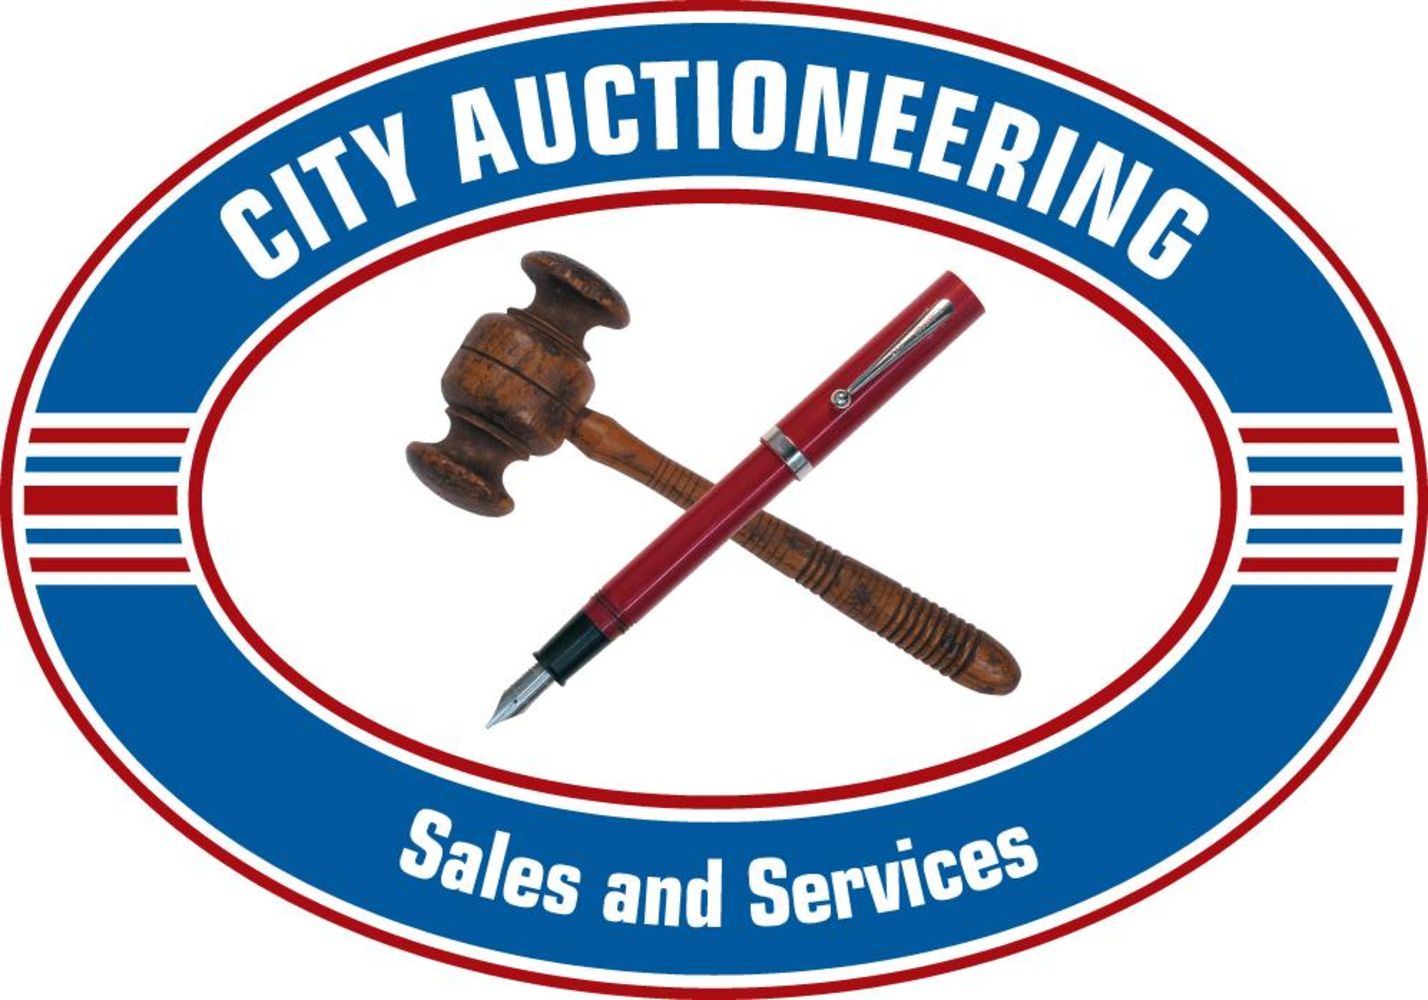 Timed General Auction Including Tools, Clothing, Building & Plumbing